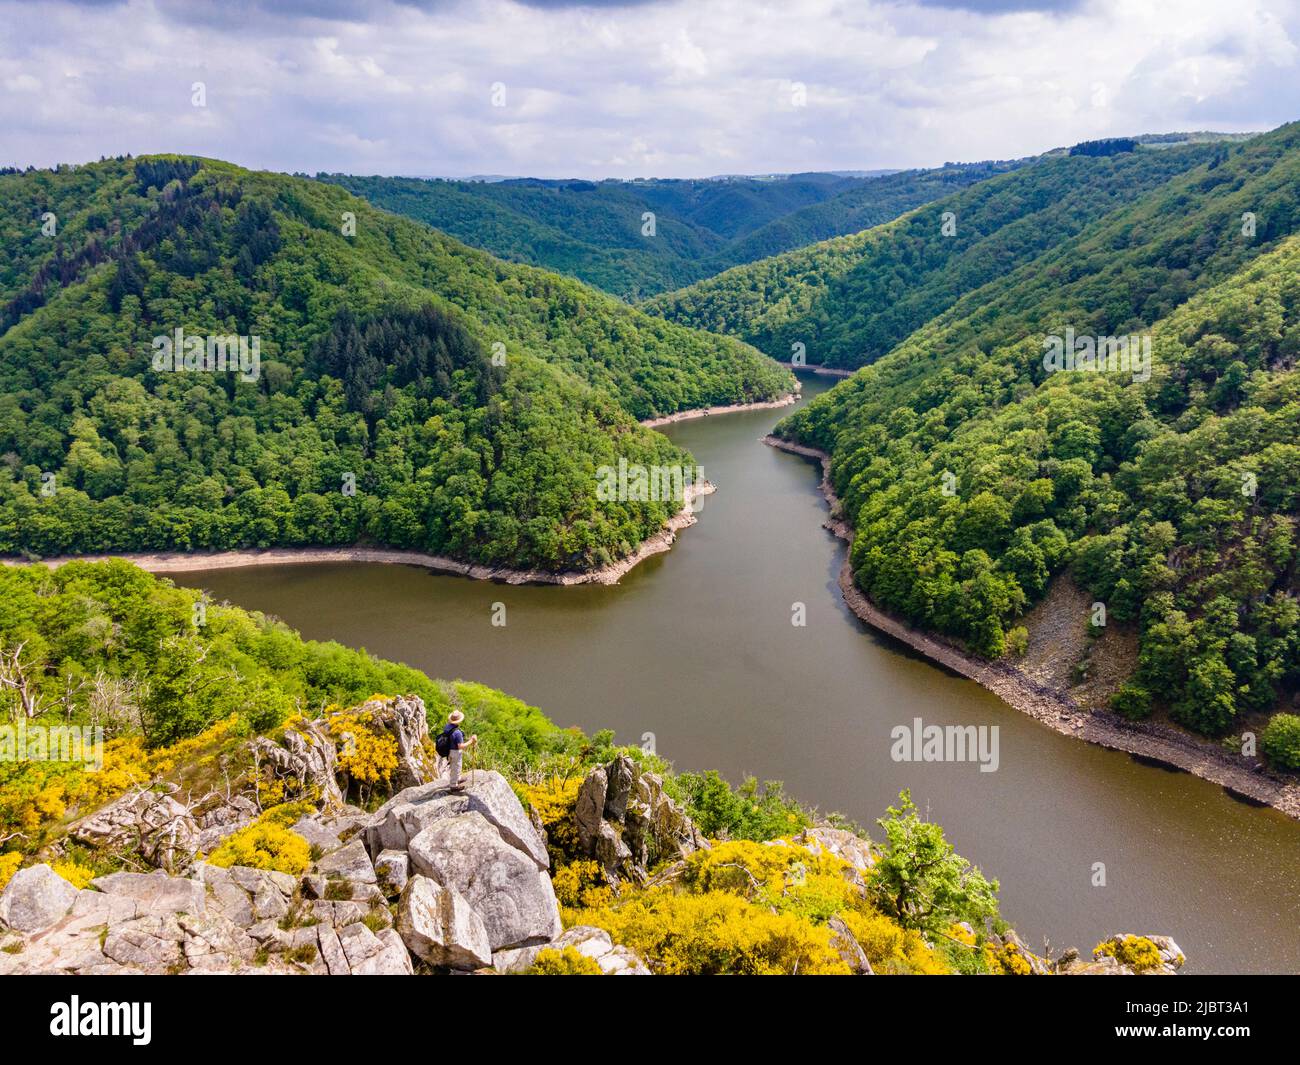 France, Correze, Neuvic, confluence of the Sumene and the Dordogne, Gratte Bruyere belvedere, reservoir of the Aigle dam (aerial view) Stock Photo